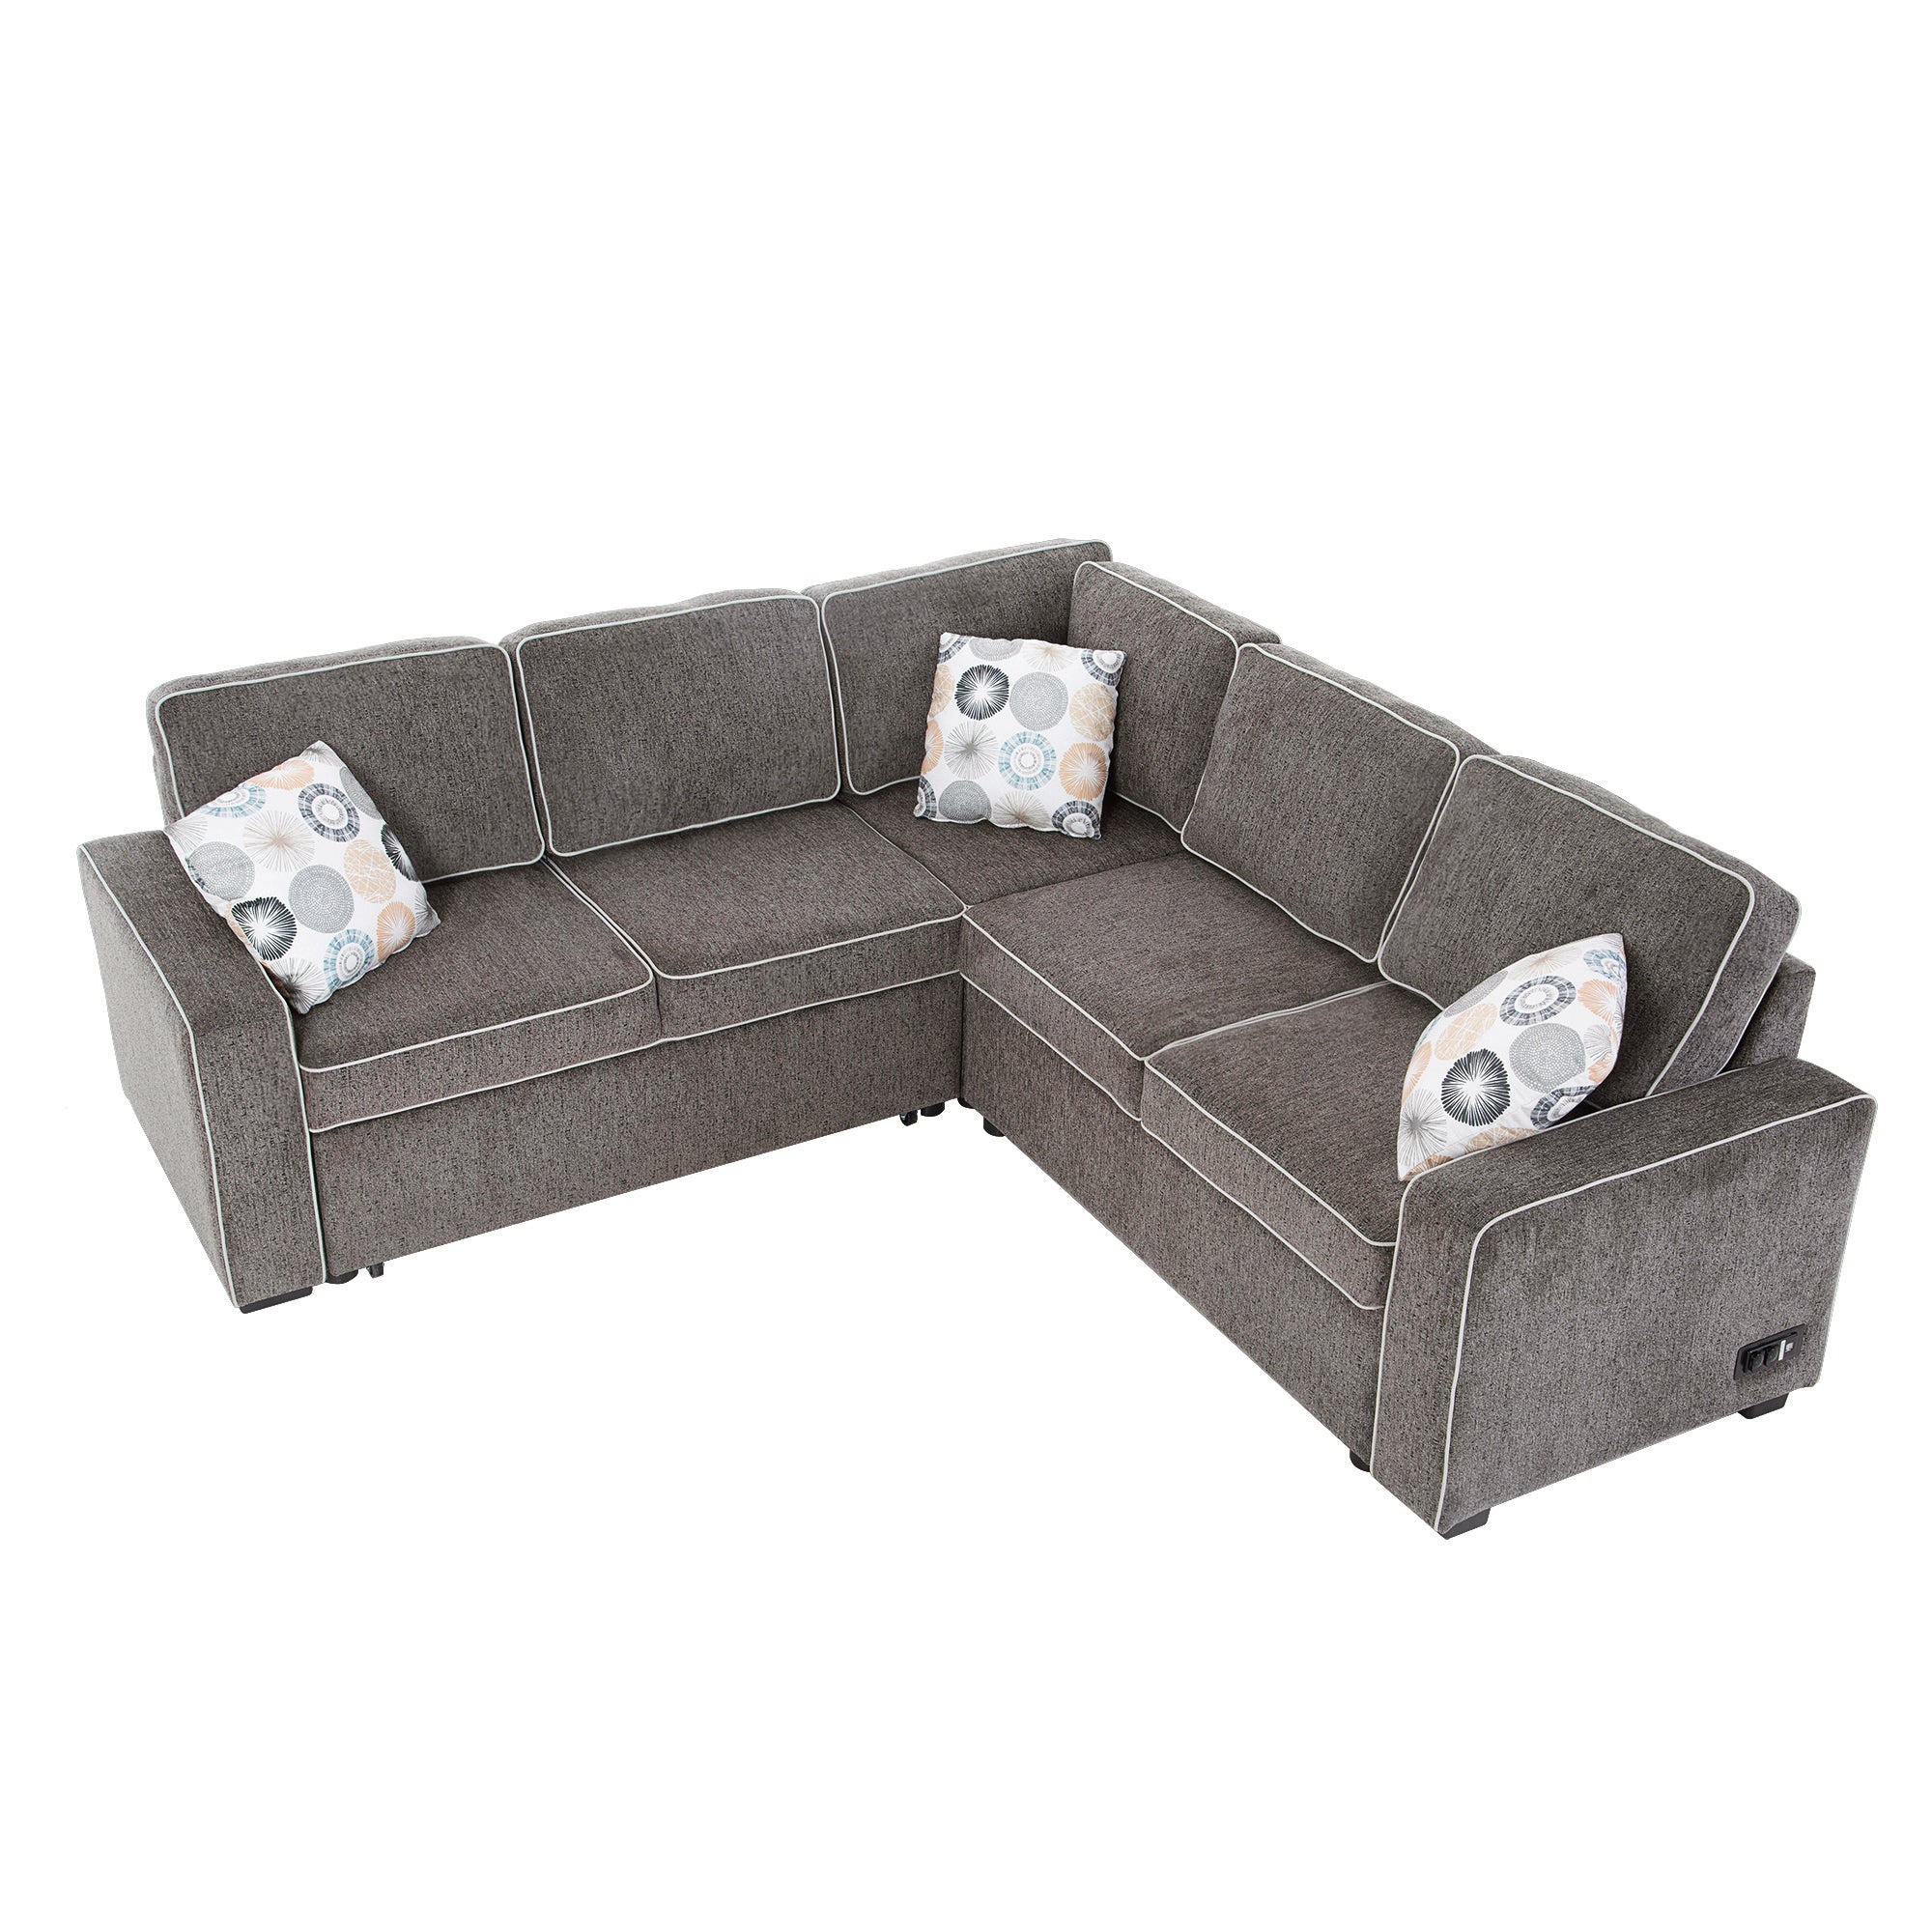 Brown 83" L-Shaped Linen Sleeper Sectional Sofa Bed with USB Charging-Sleeper Sectionals-American Furniture Outlet